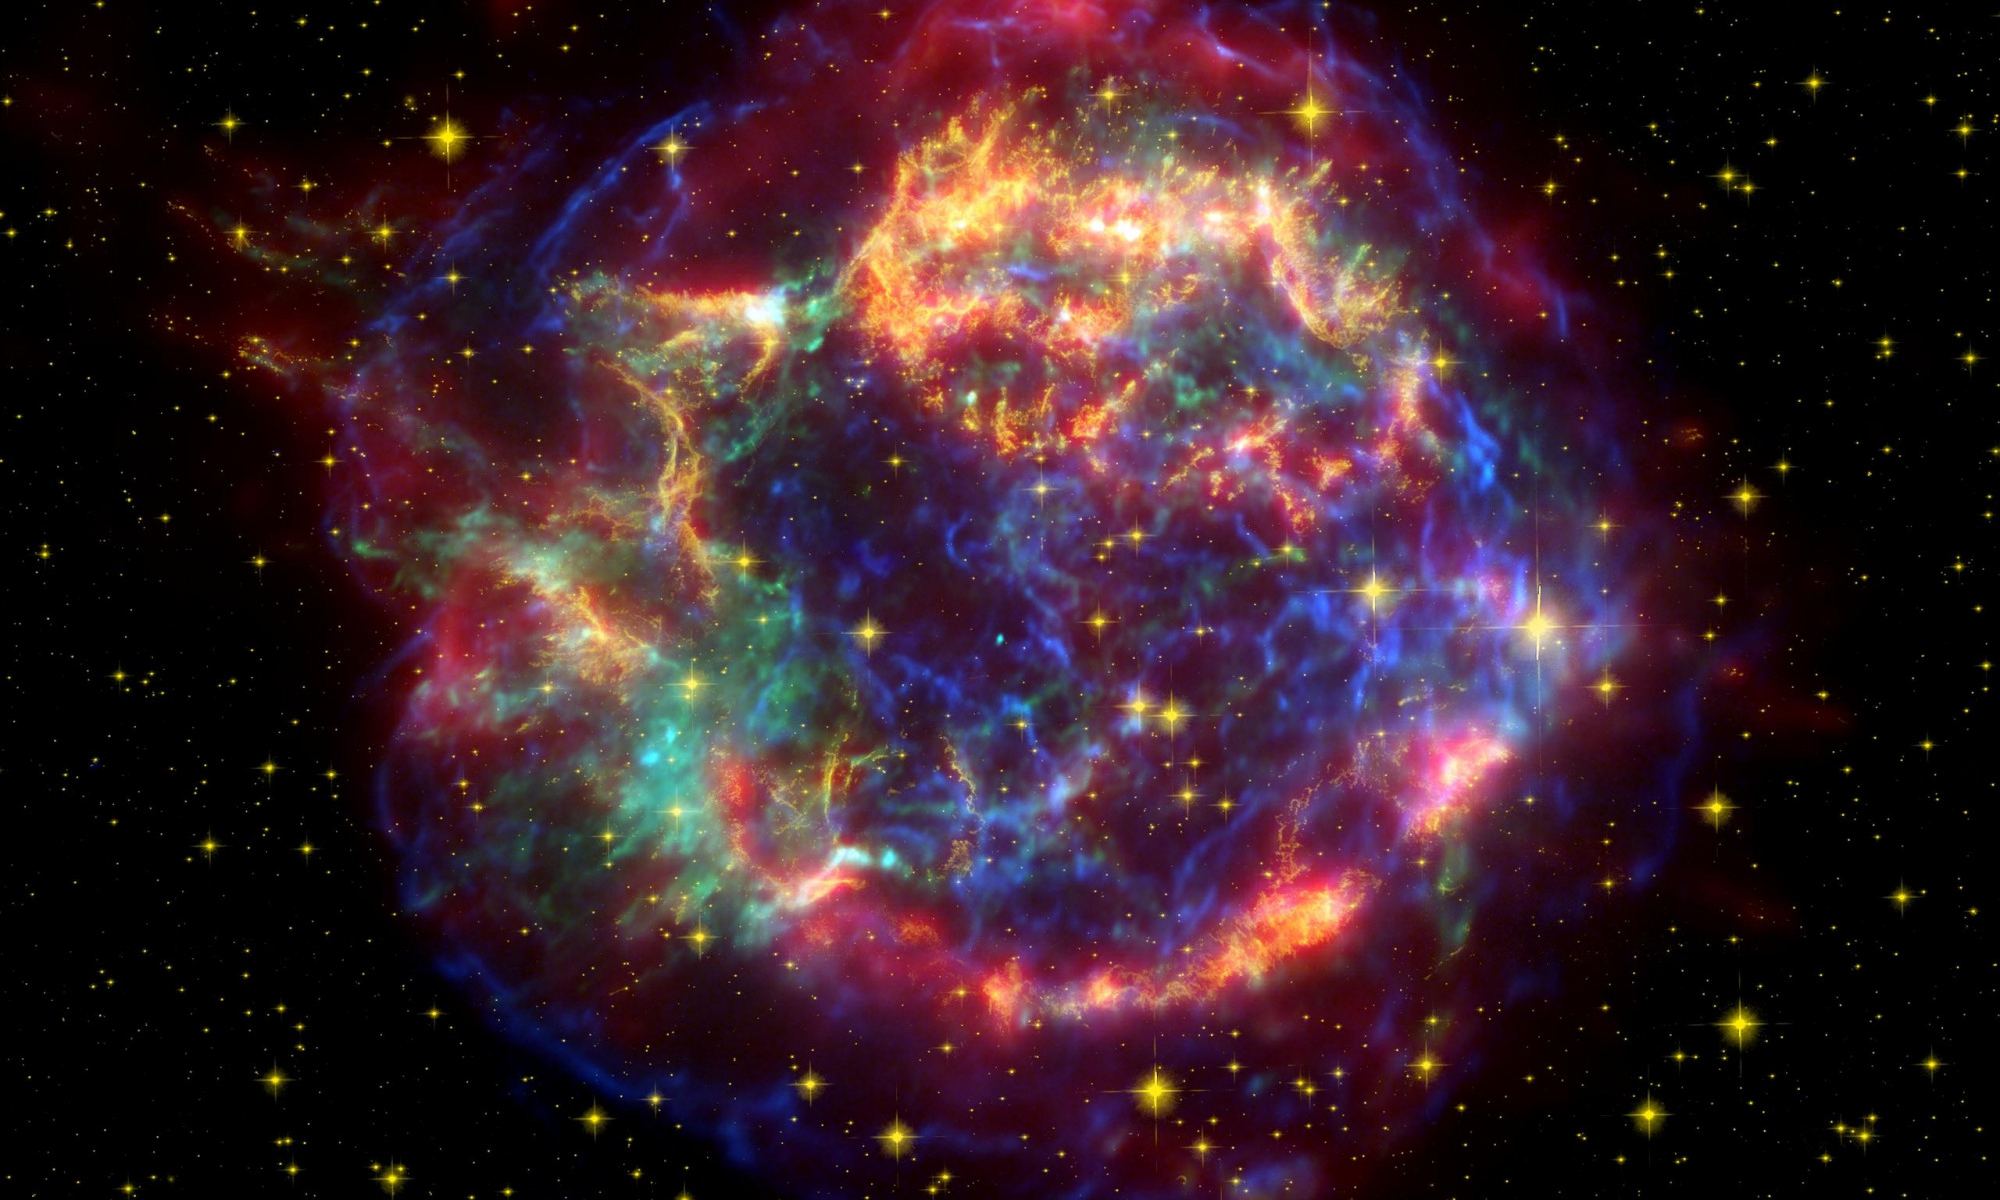 Supernova forensics: Eight years later, an explosion far out in space is  still revealing secrets about the lives of stars